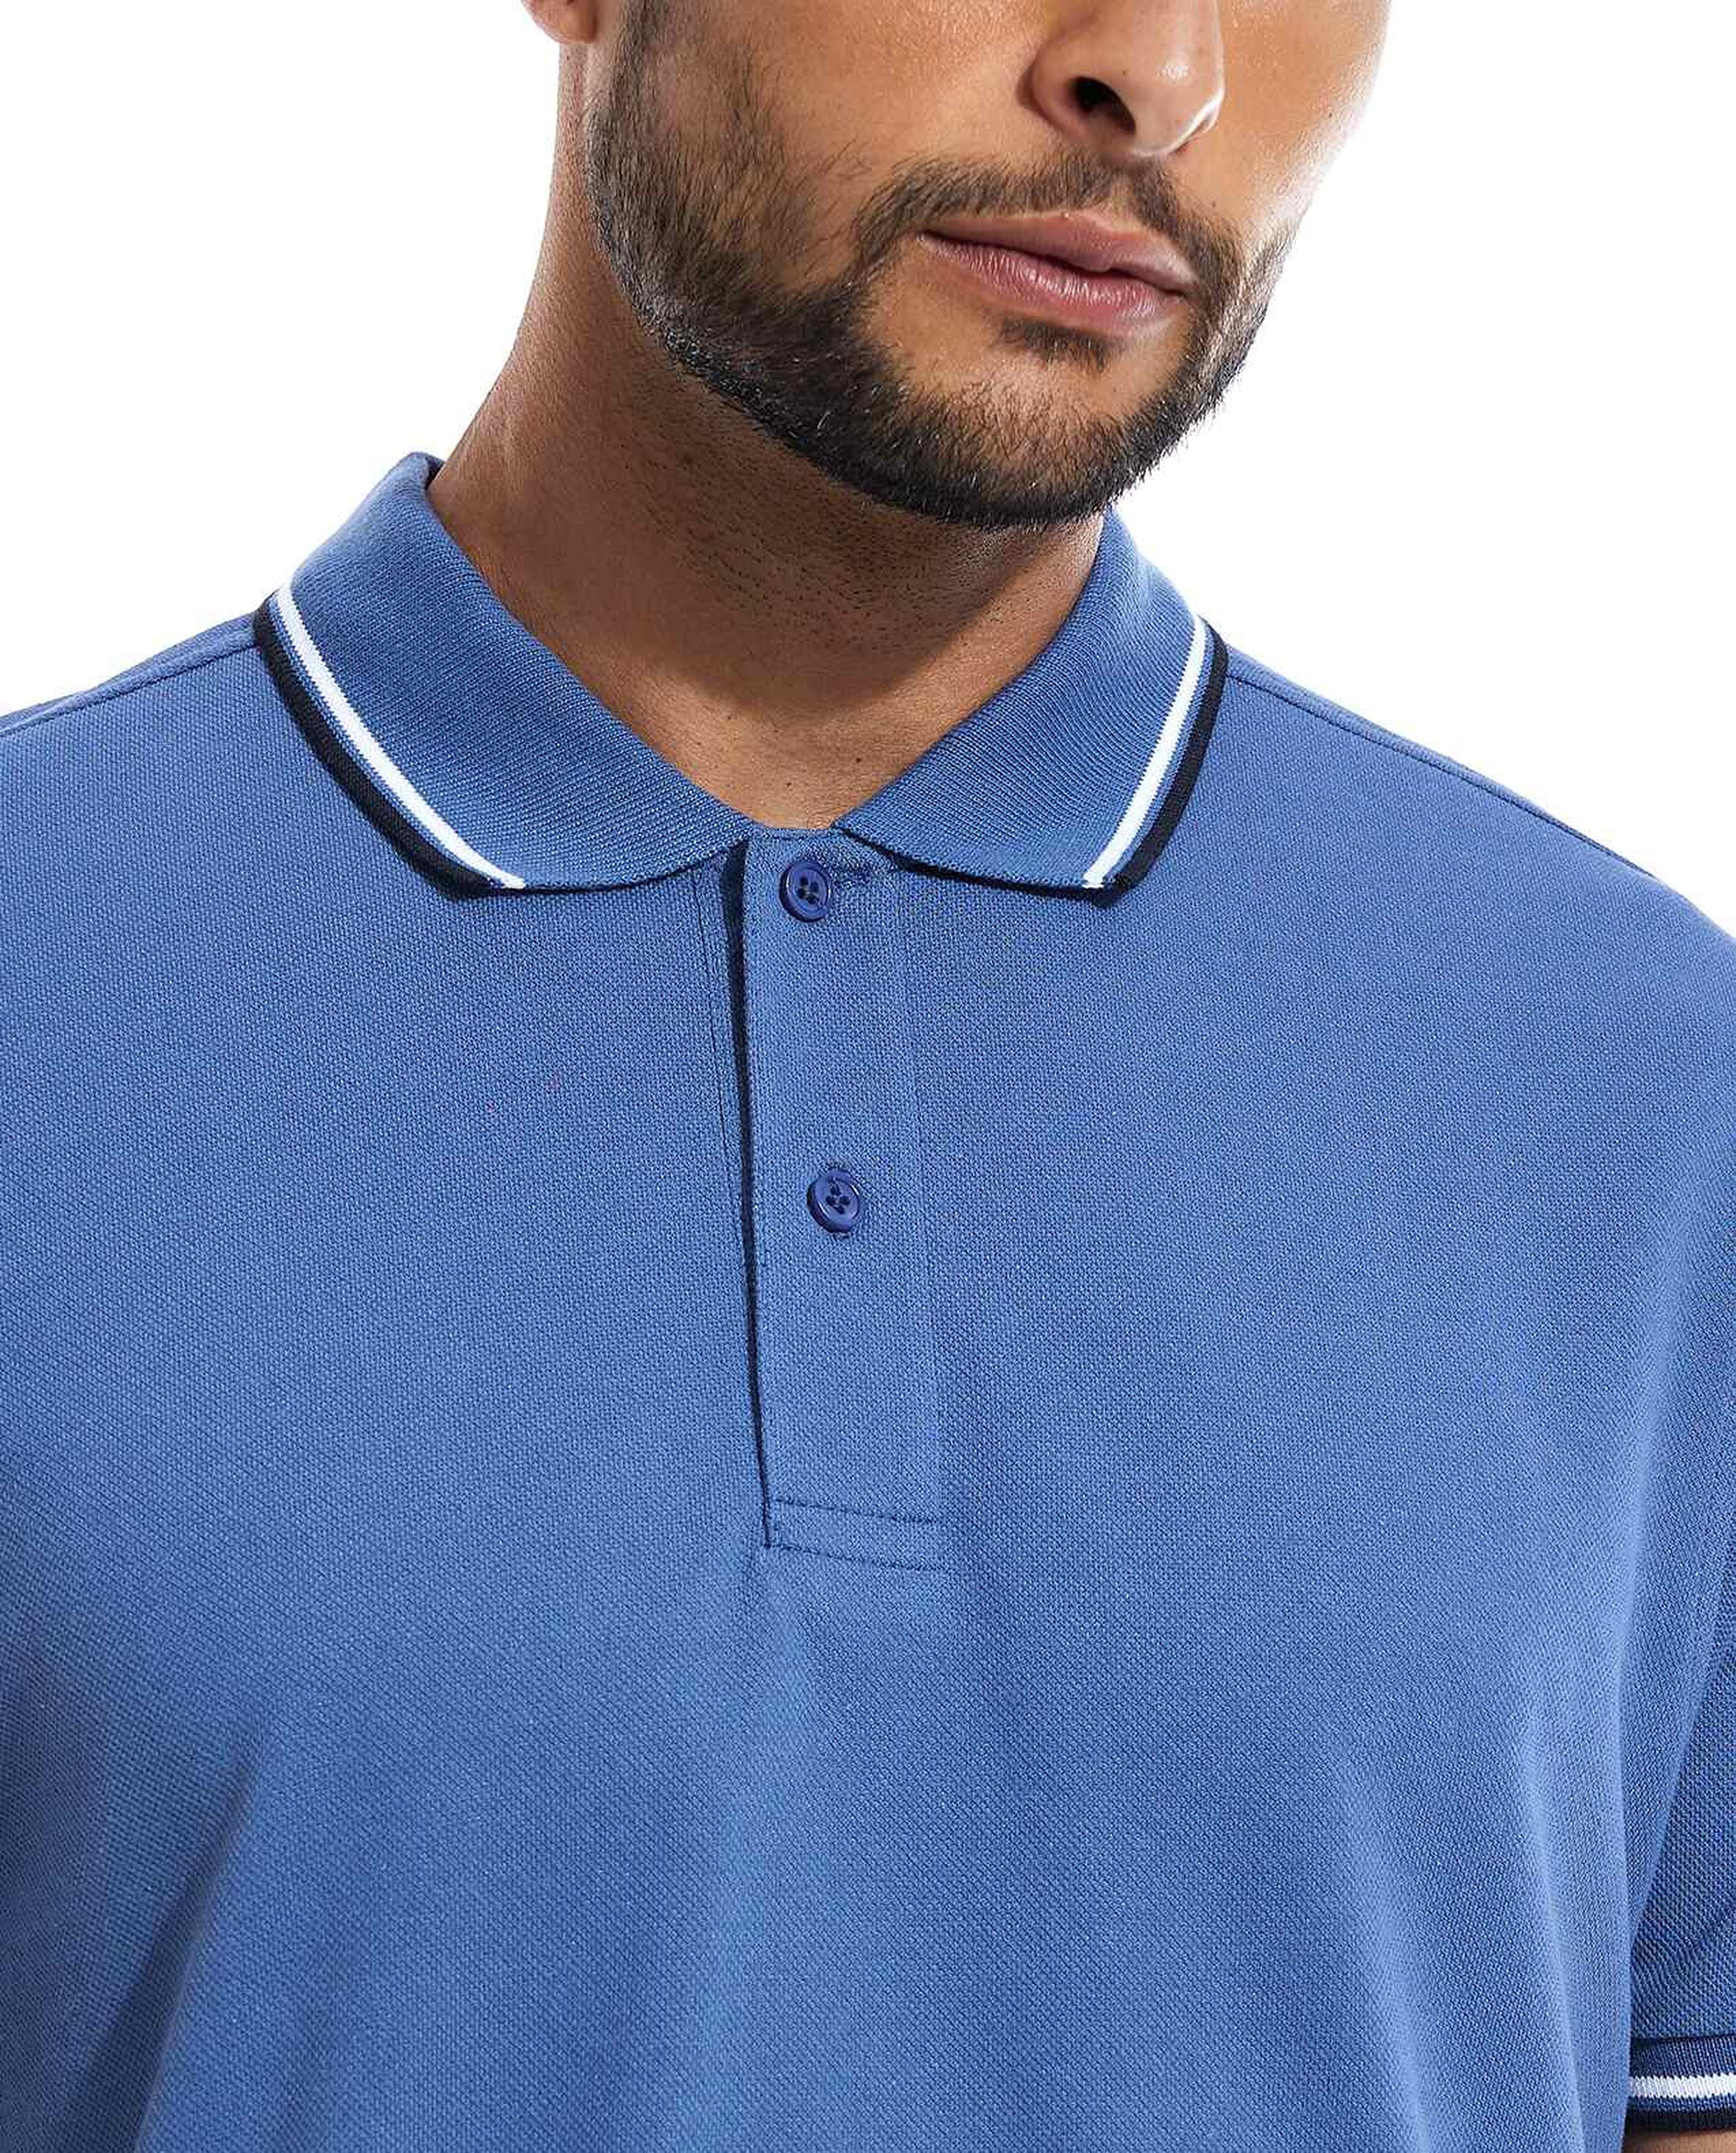 Contrast Tipping Polo T-Shirt with Short Sleeves